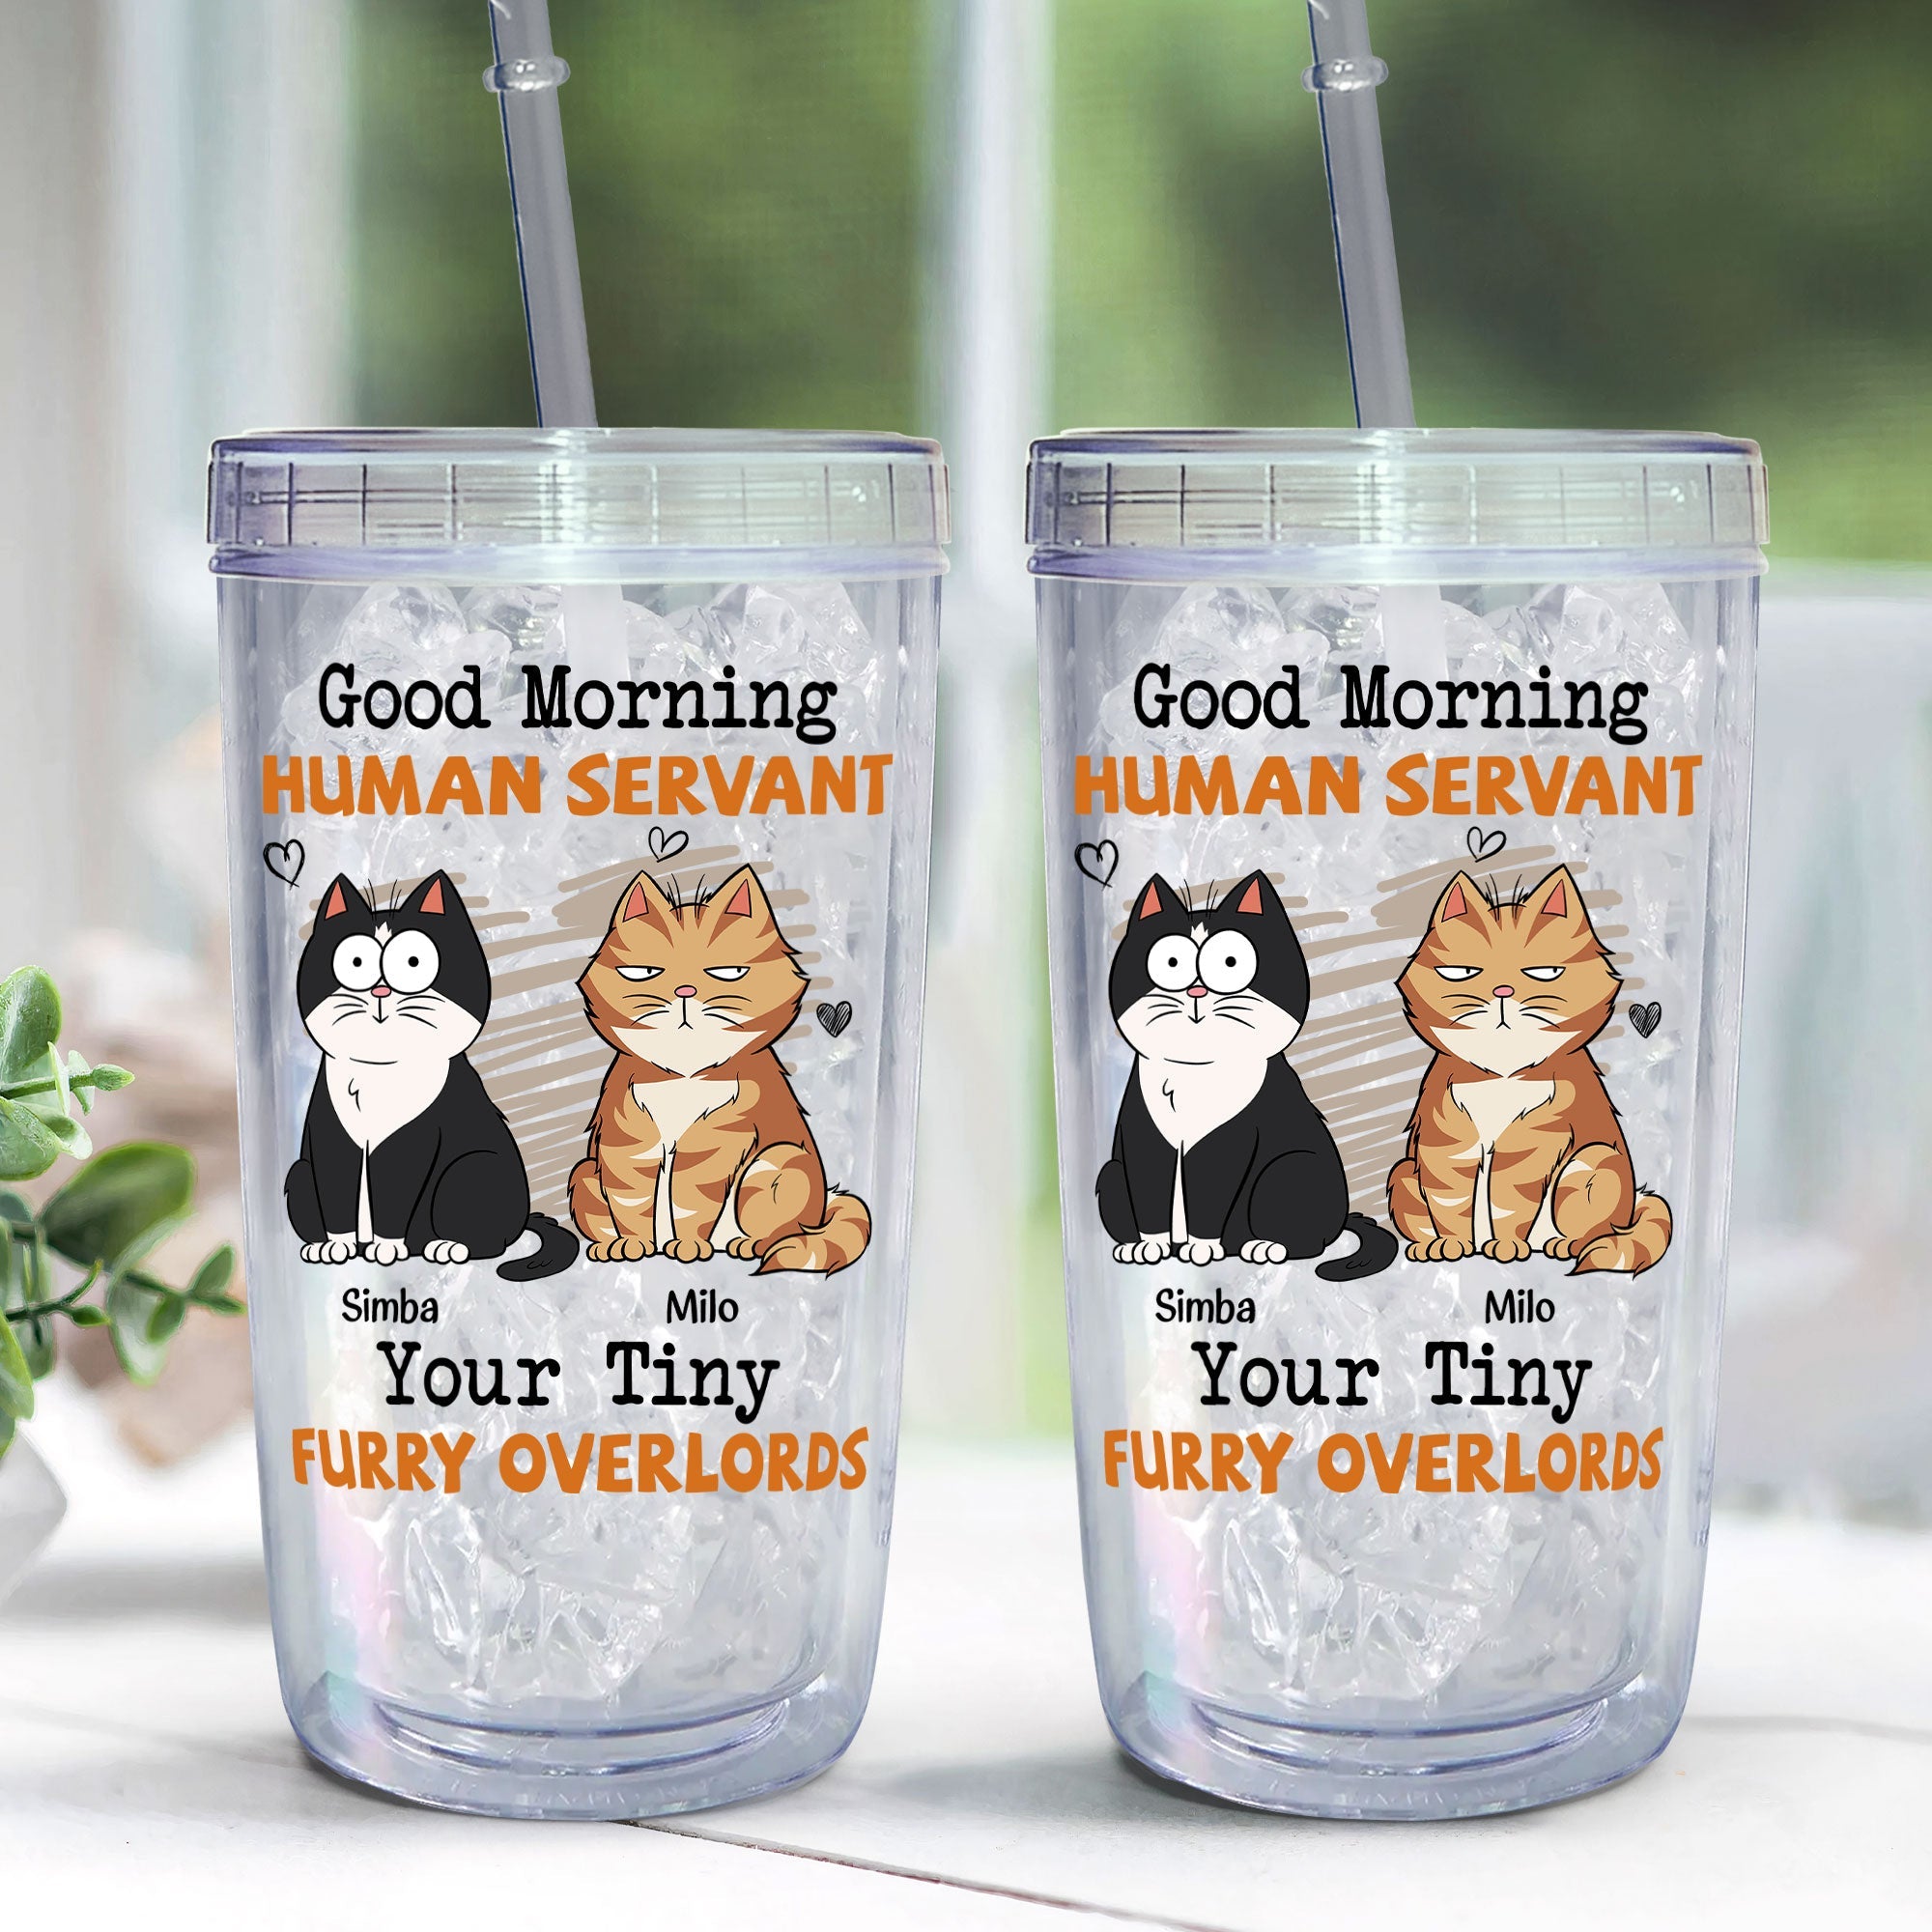 Good Morning Human Servant - Personalized Acrylic Insulated Tumbler With Straw